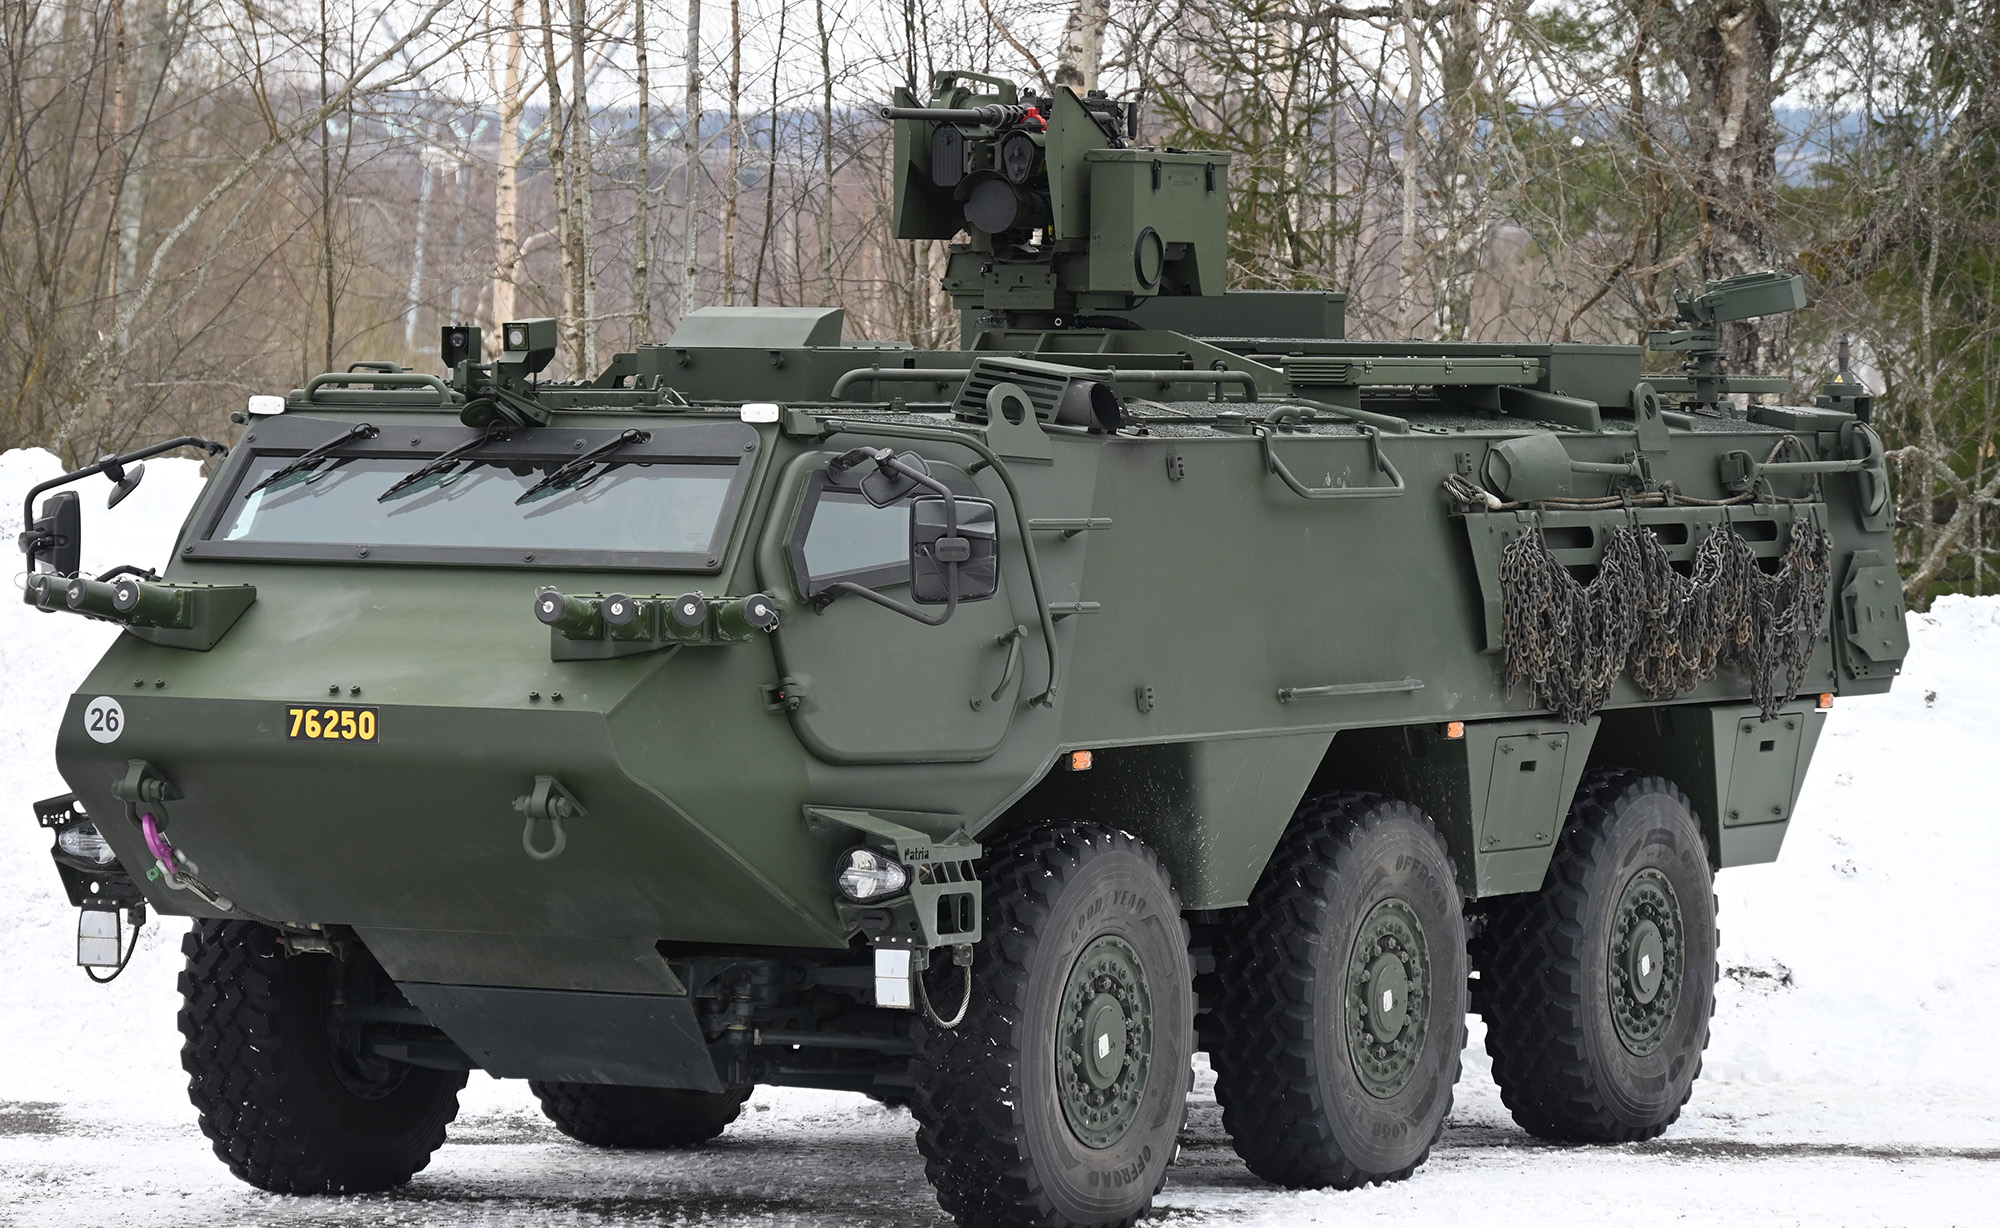 Pansarterrängbil 300 armored all-terrain vehicle based on Patria 6x6 system. Photo: Swedish Armed Forces/Patria